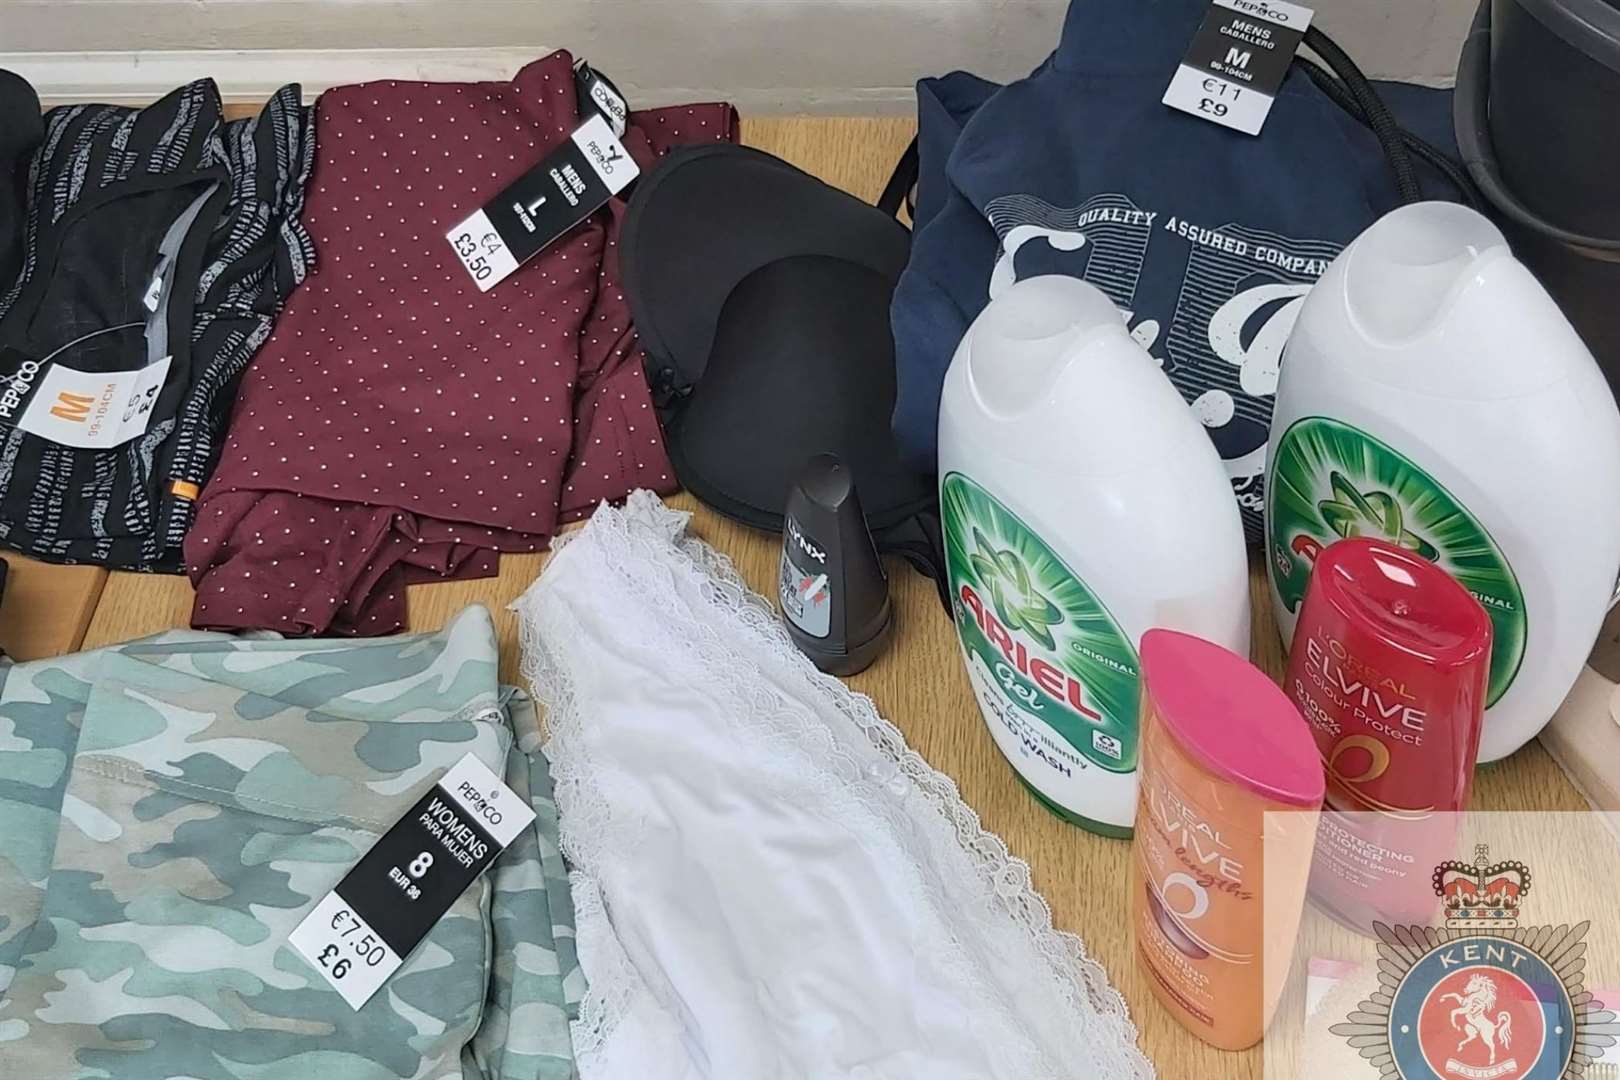 Clothing and a host of other items were found